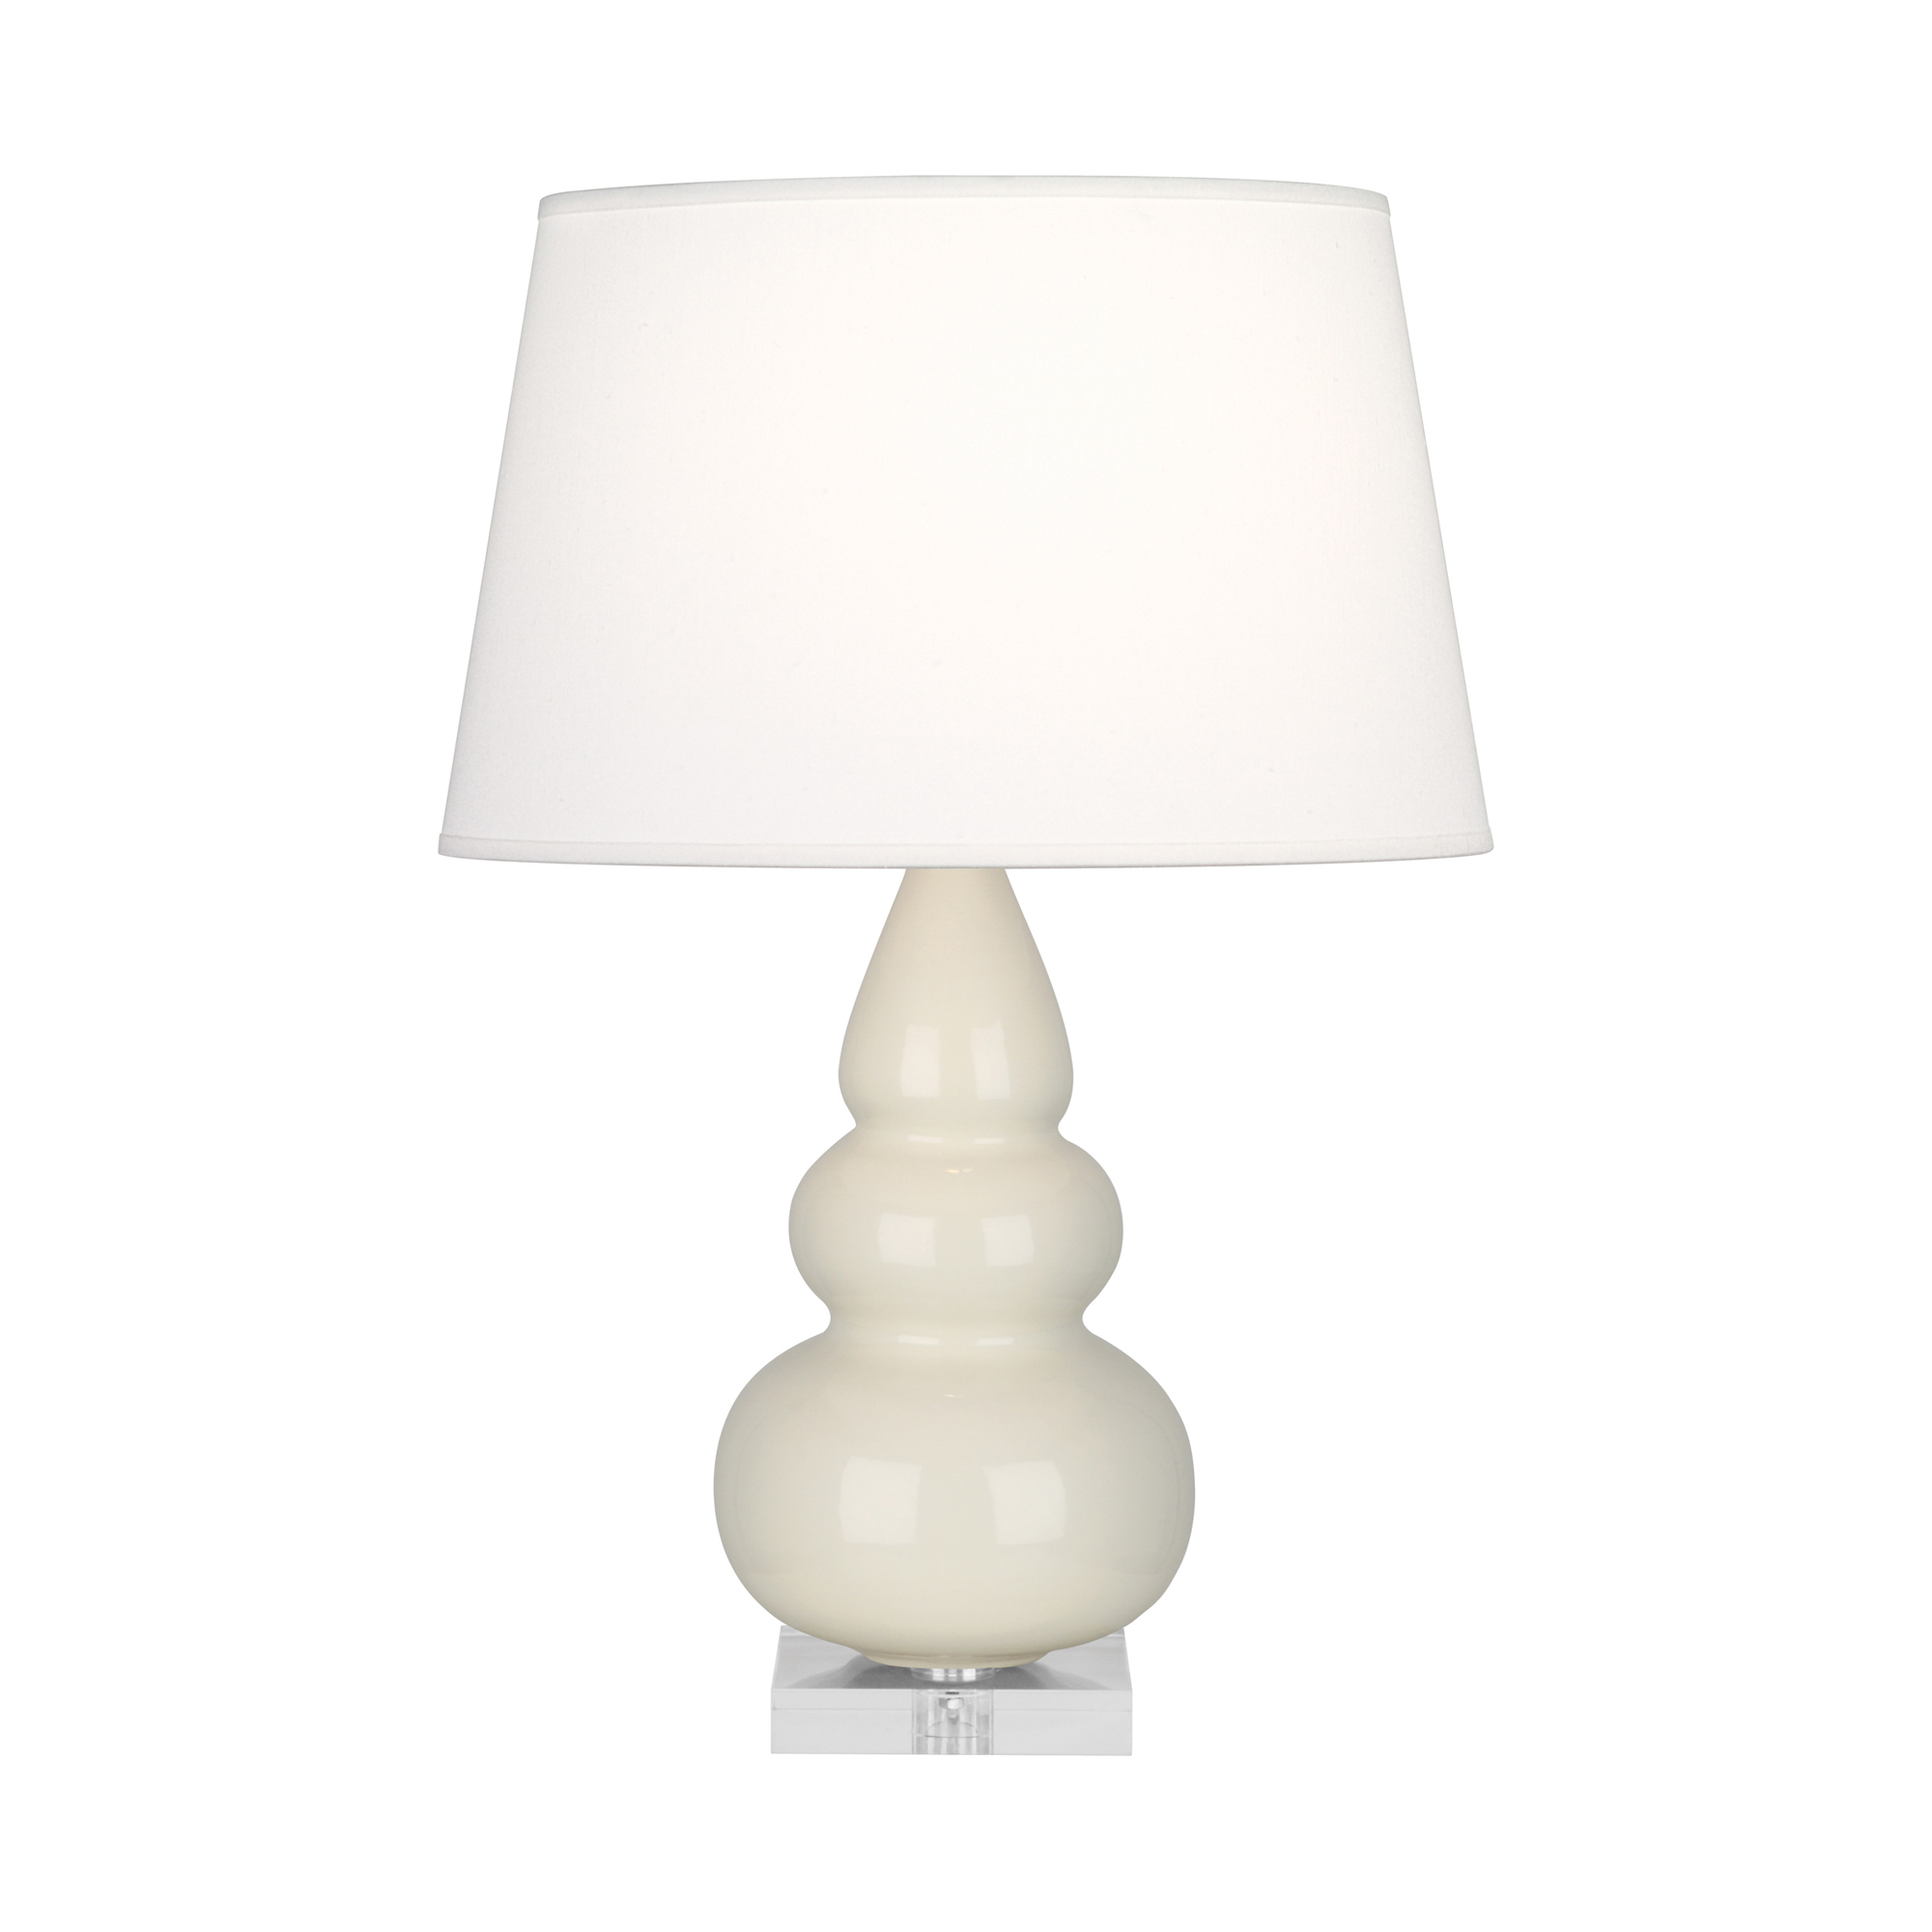 Small Triple Gourd Accent Lamp Style #A294X